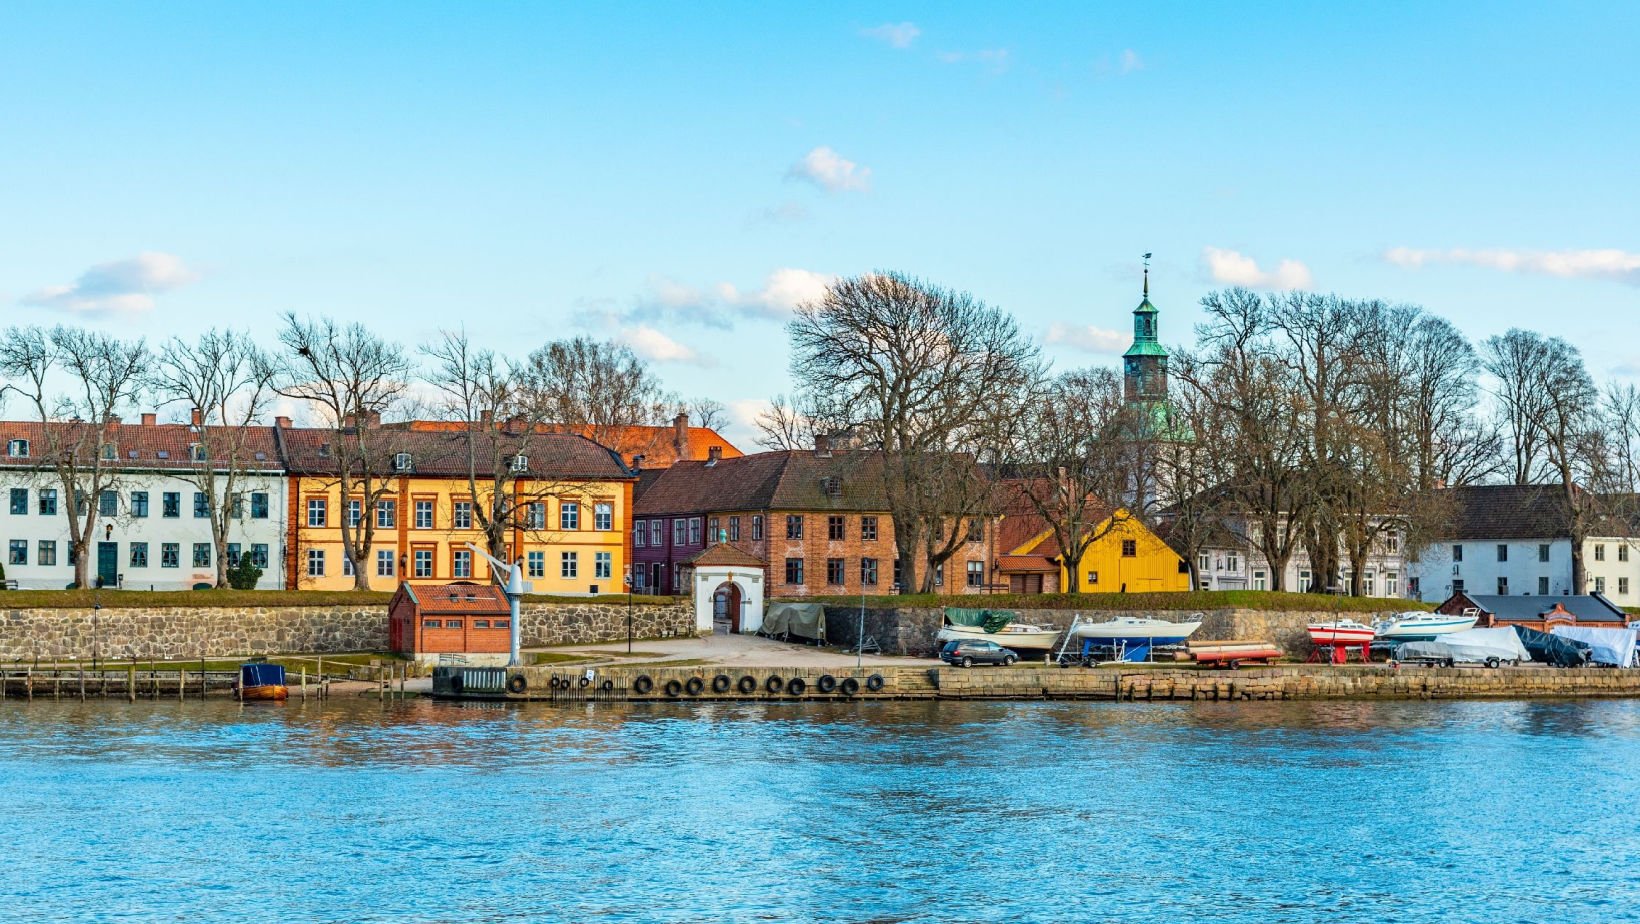 Waterfront view of Old Fredrikstad, Norway.